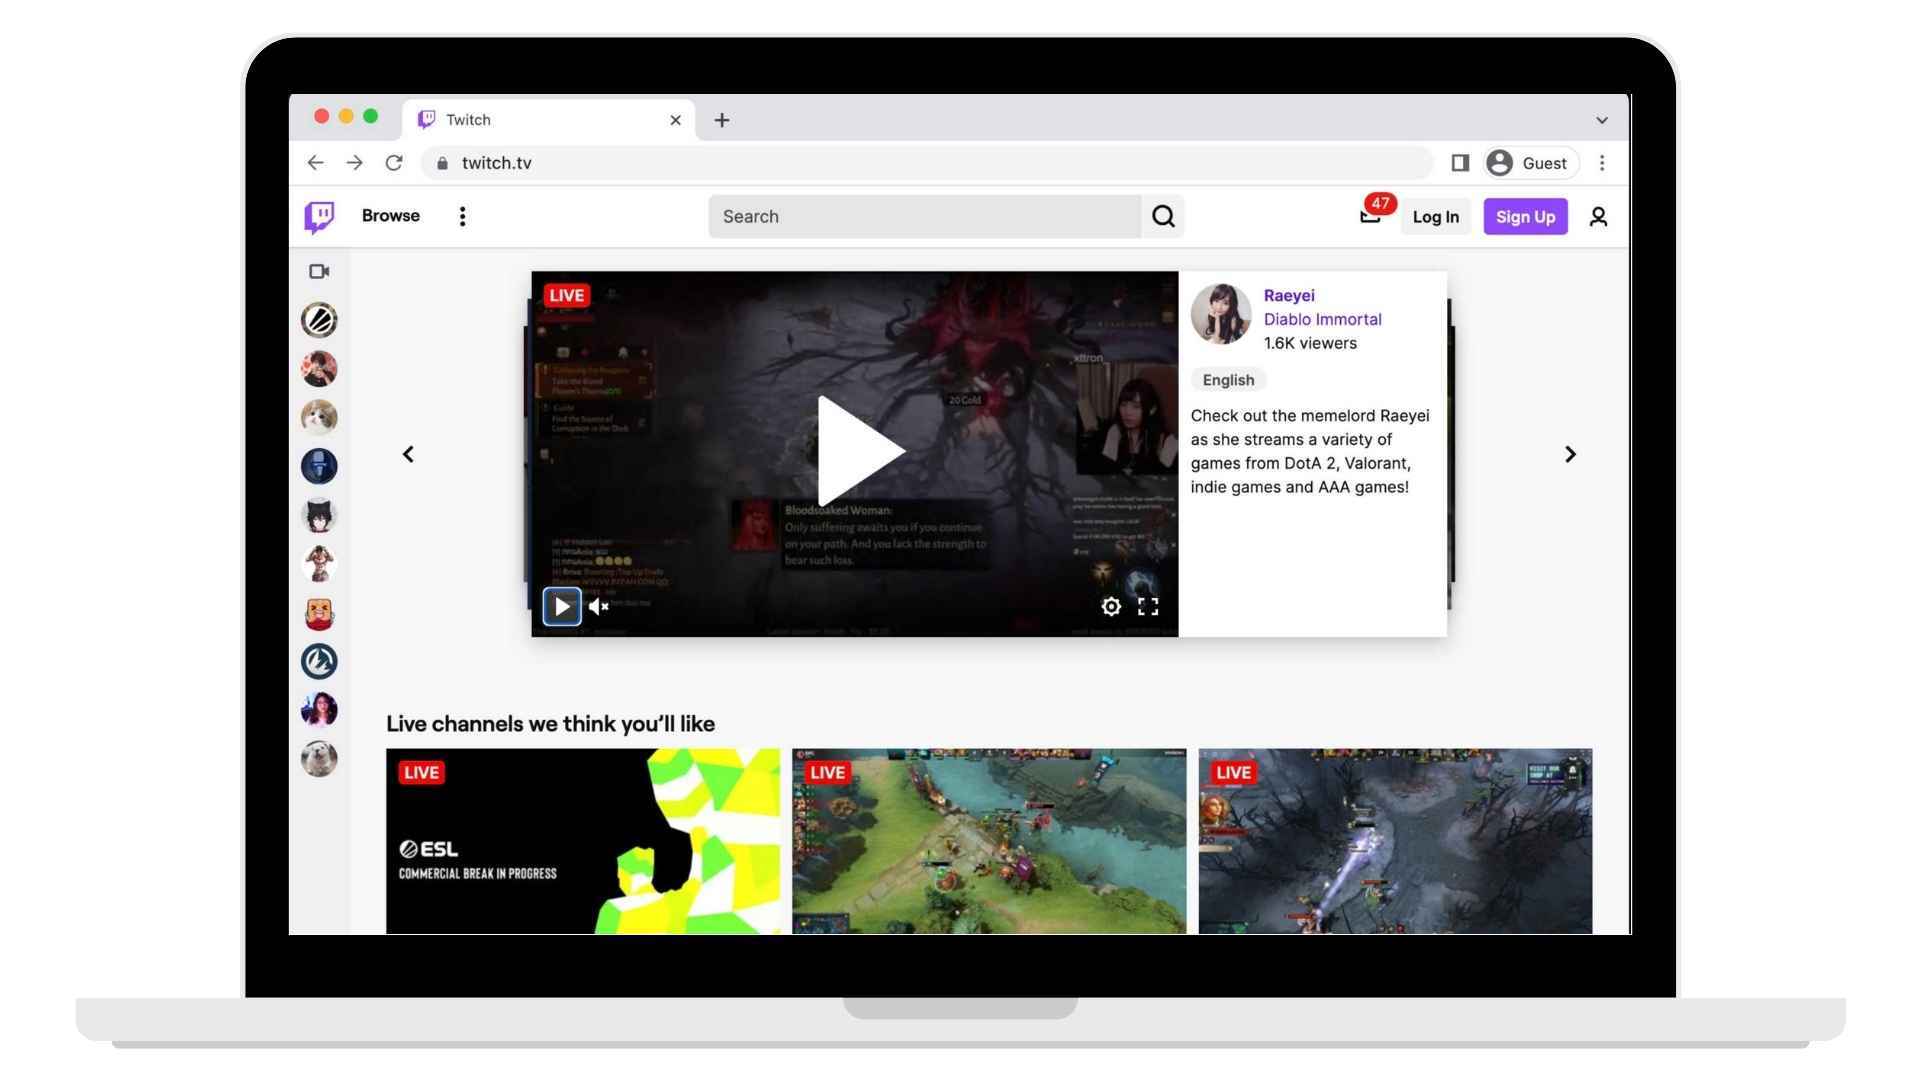 Where can I get links to download PC games from Google drive? - Quora